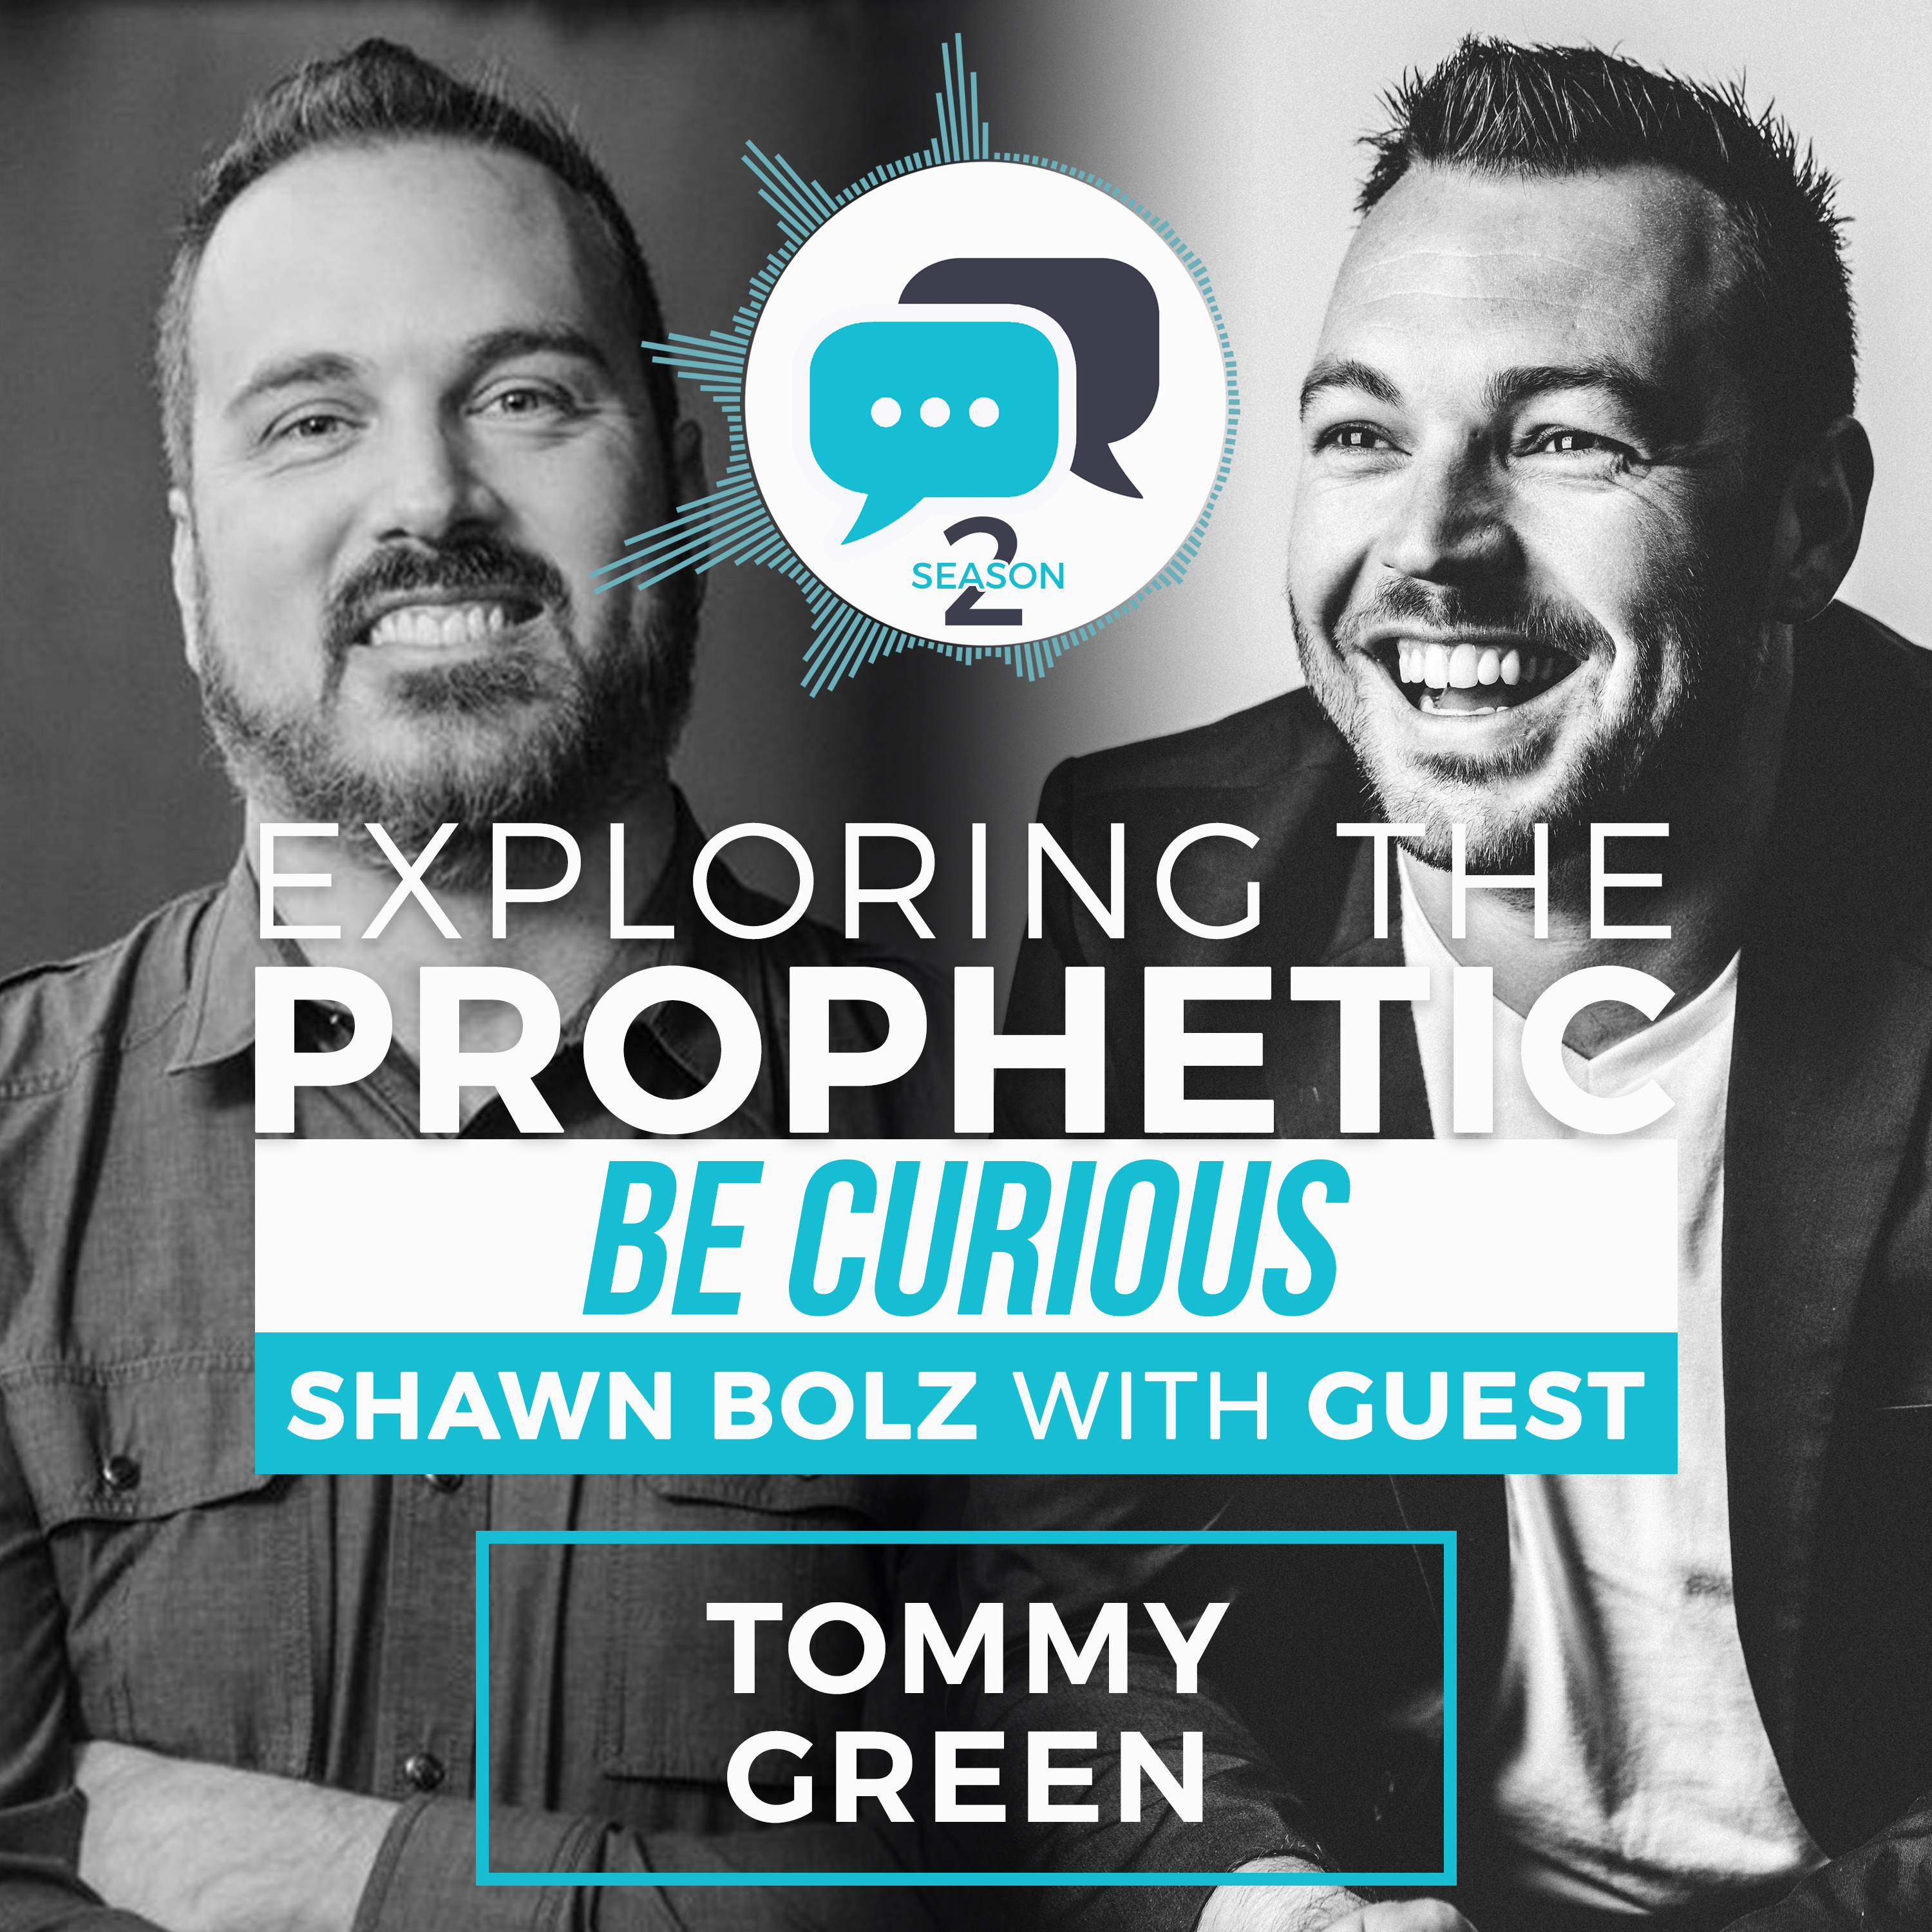 Exploring the Prophetic with Tommy Green (Season 2, Ep. 4)